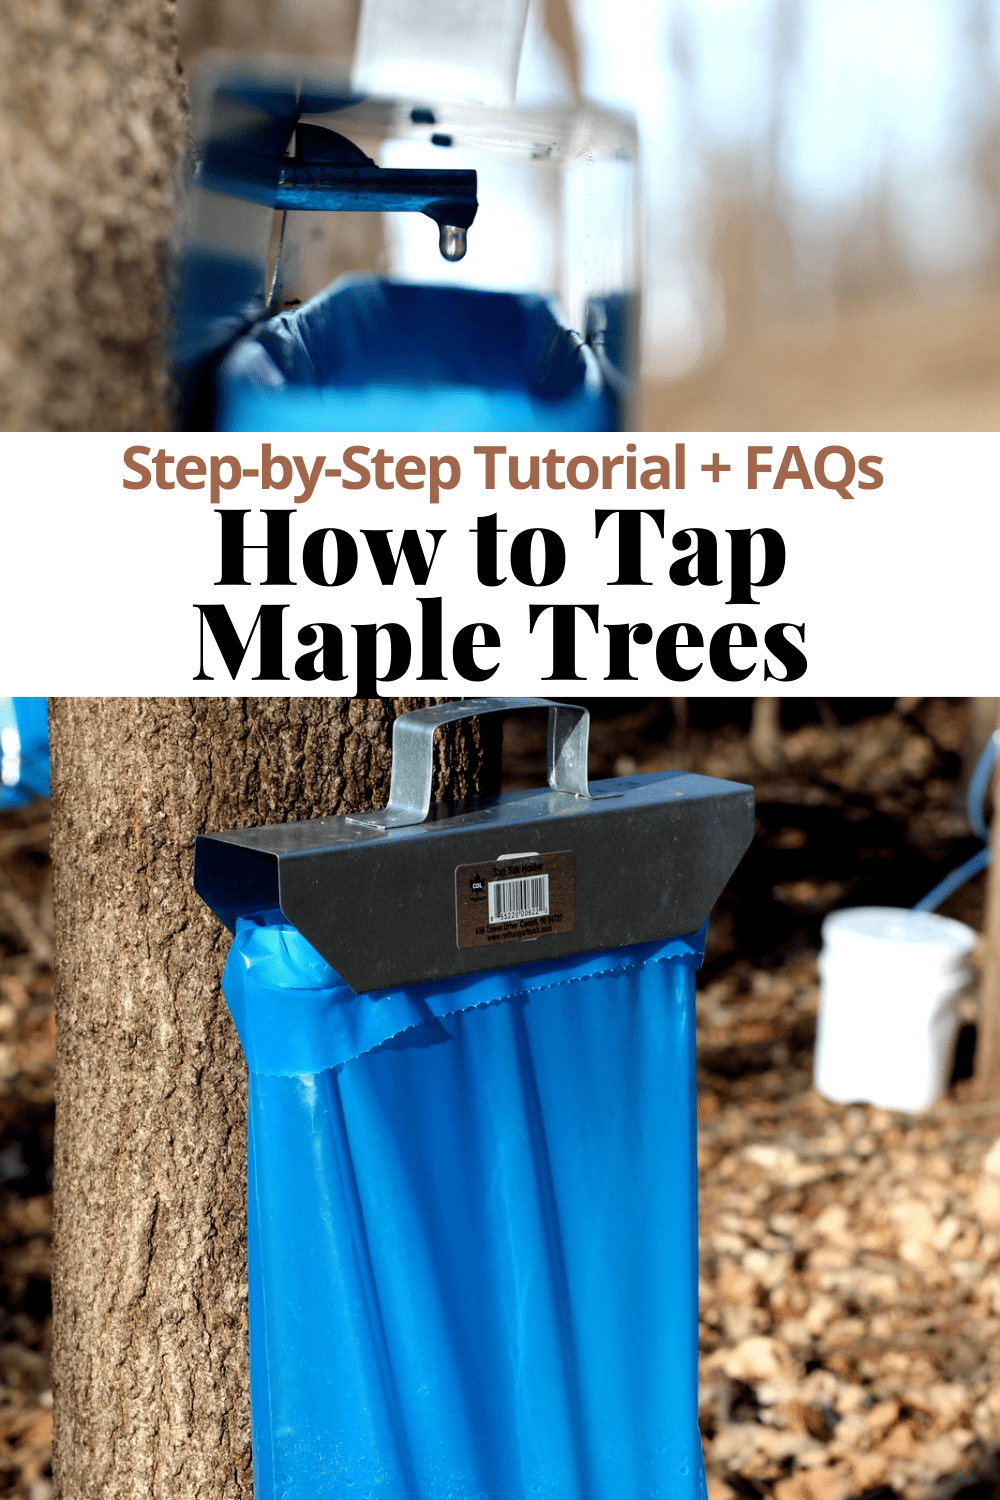 How to Tap Maple Trees - The Wooden Skillet